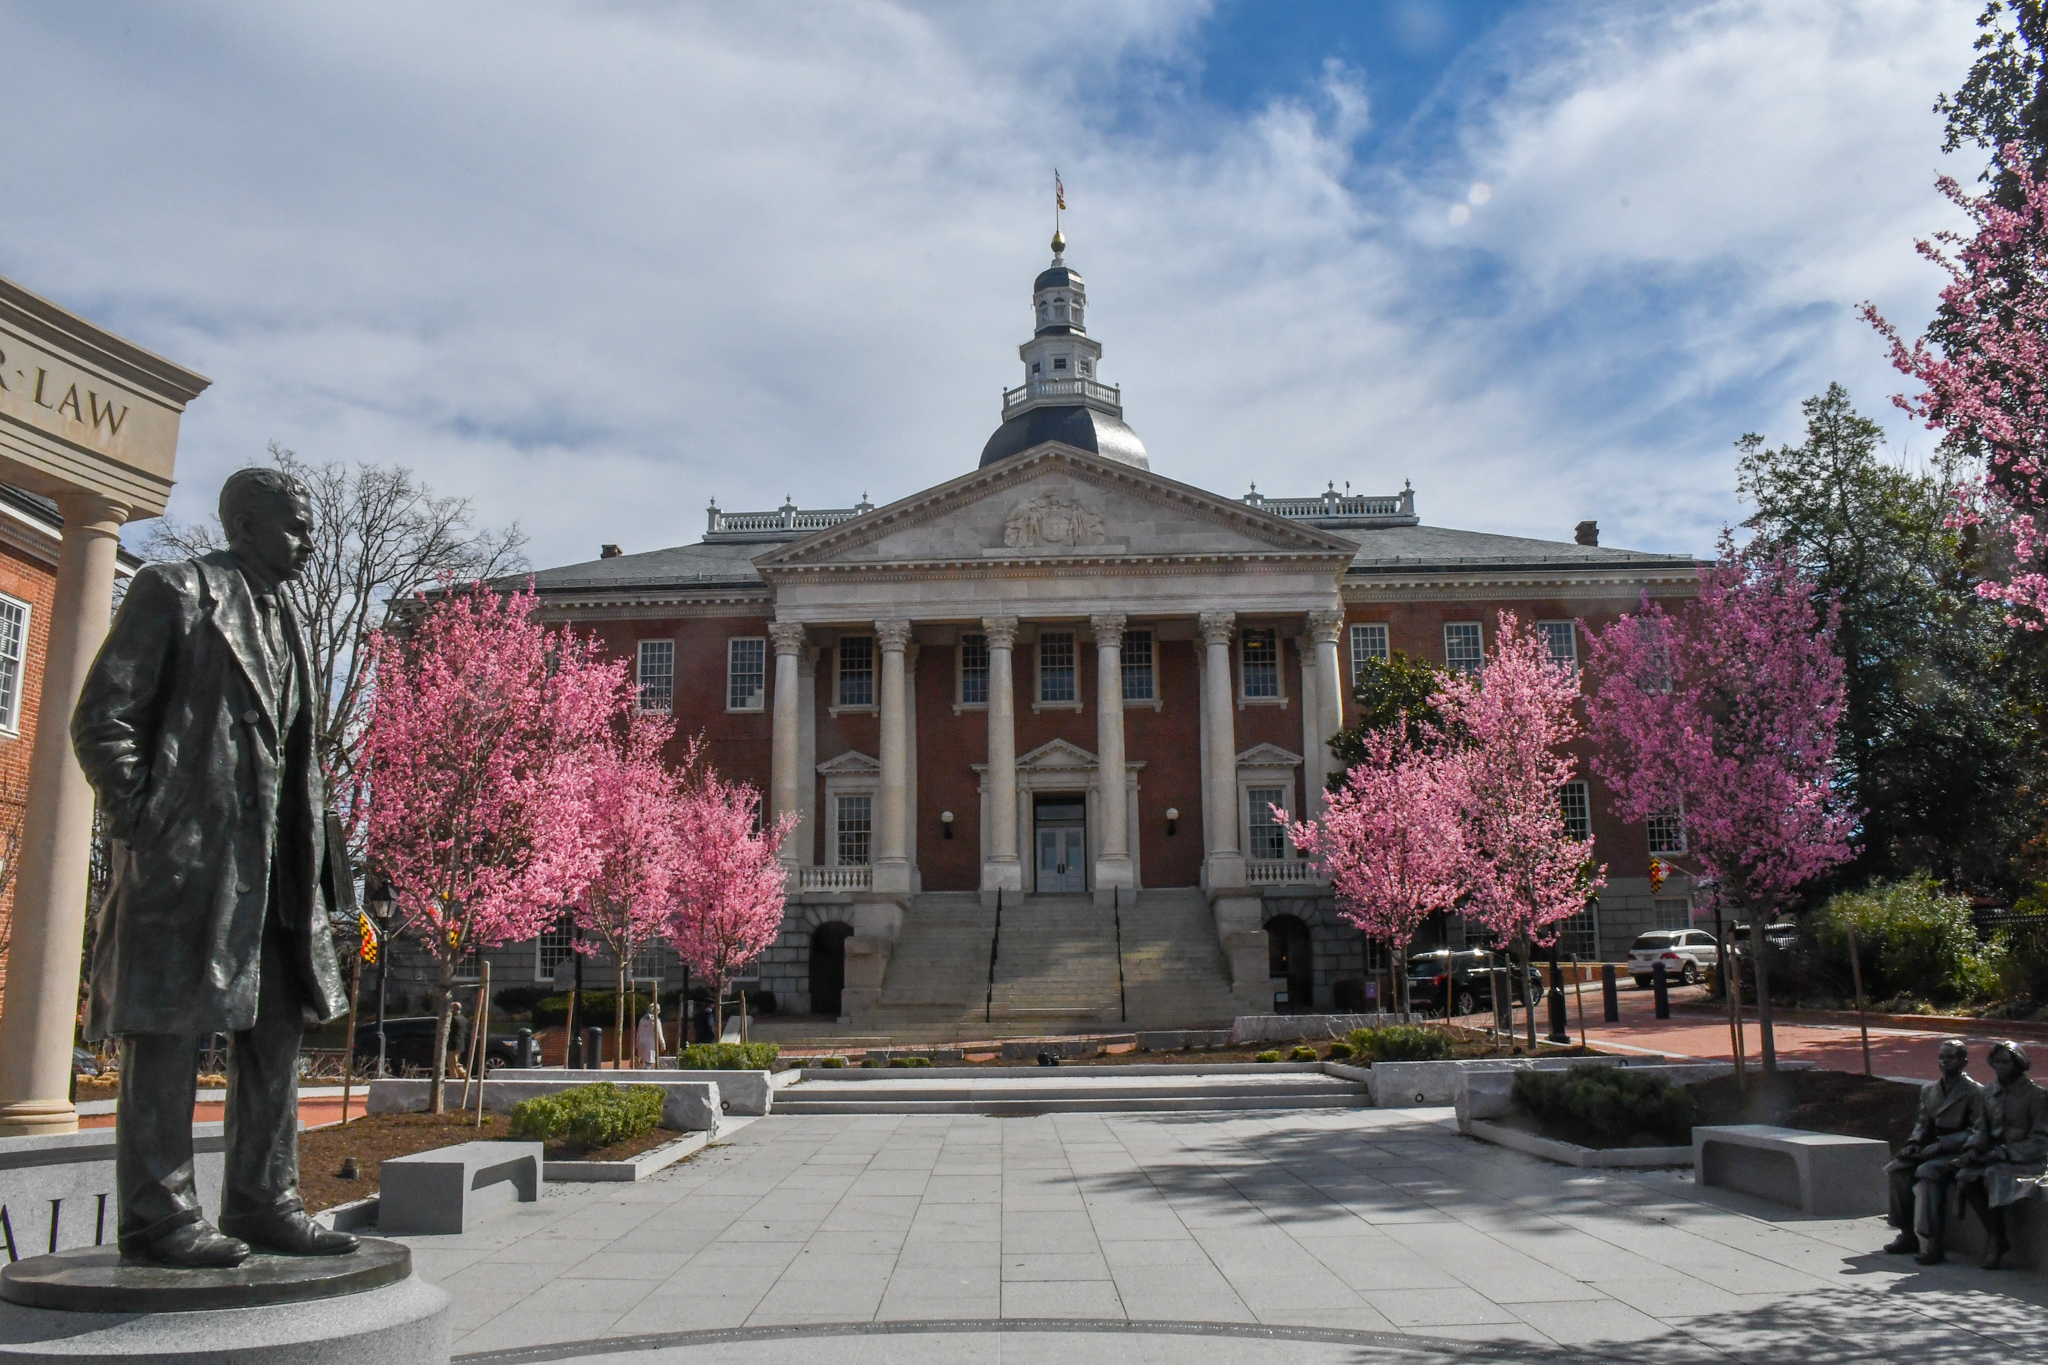 The Maryland State House in Annapolis on March 8, 2022. (Christine Zhu/Capital News Service)